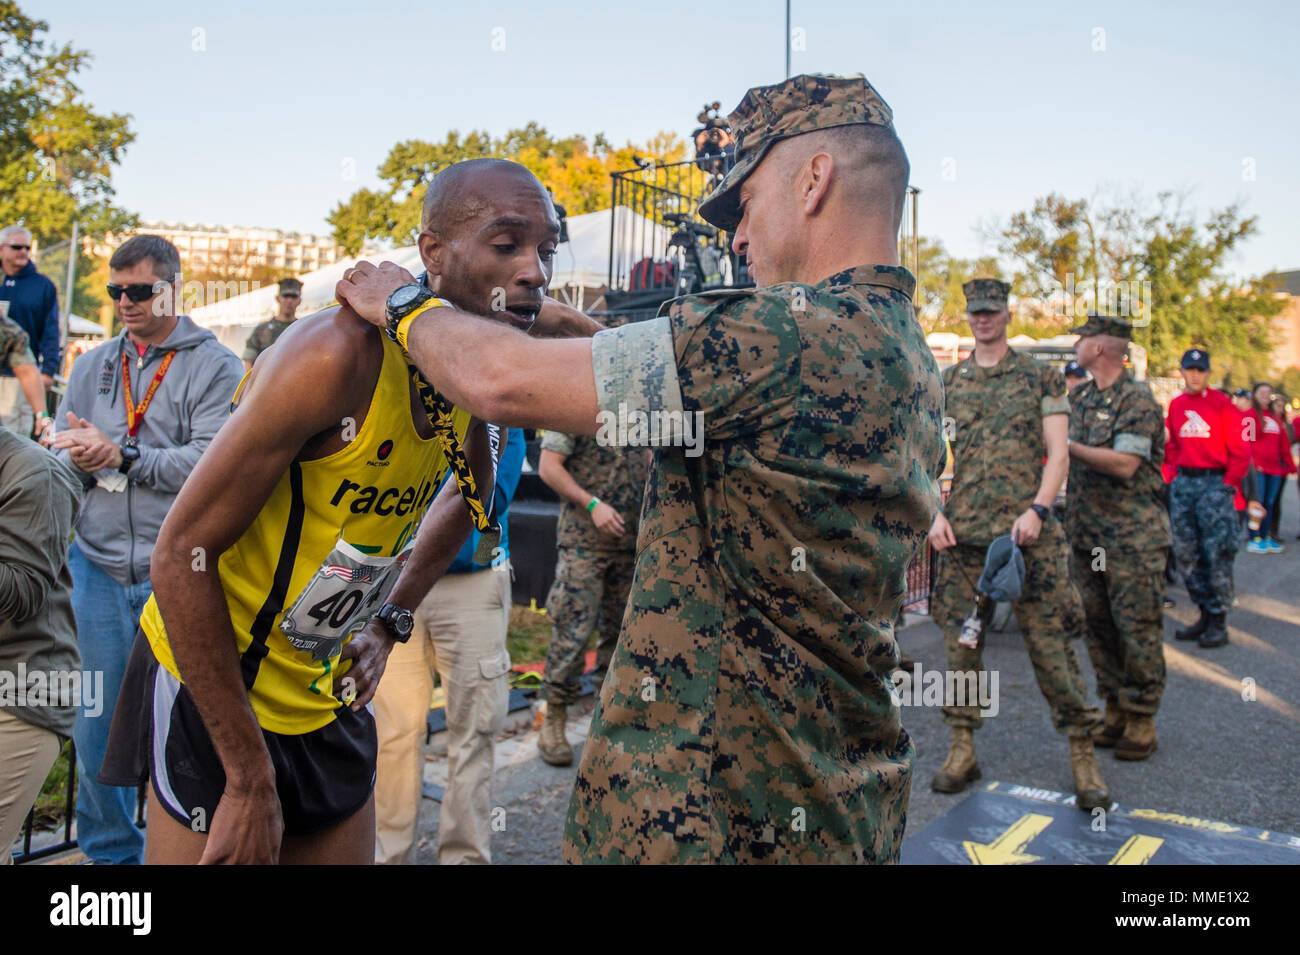 U.S. Marine Corps Col. Joseph Murray, commanding officer of Marine Corps Base Quantico, presents a finisher medal to Denzel Ramirez, Arlington, Va., first finisher of the Marine Corps Marathon 10K, Arlington, Va., Oct. 22, 2017. Also known as 'The People's Marathon,' the 26.2 mile race drew roughly 30,000 participants to promote physical fitness, generate goodwill in the community, and showcase the organizational skills of the Marine Corps. (U.S. Marine Corps photo by Lance Cpl. Yasmin D. Perez) Stock Photo